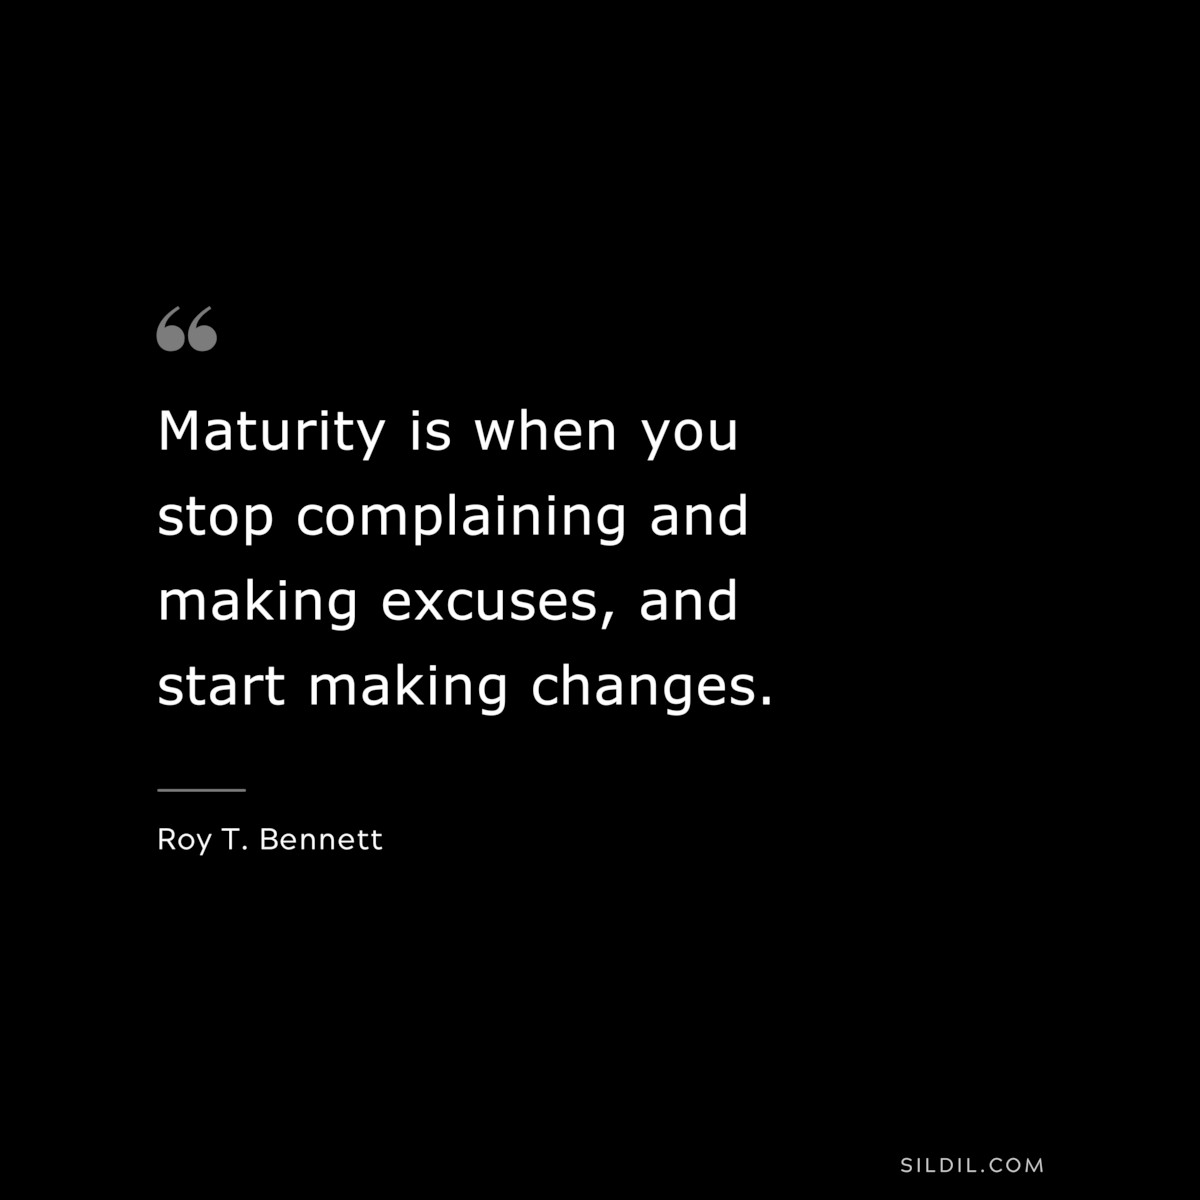 Maturity is when you stop complaining and making excuses, and start making changes. ― Roy T. Bennett